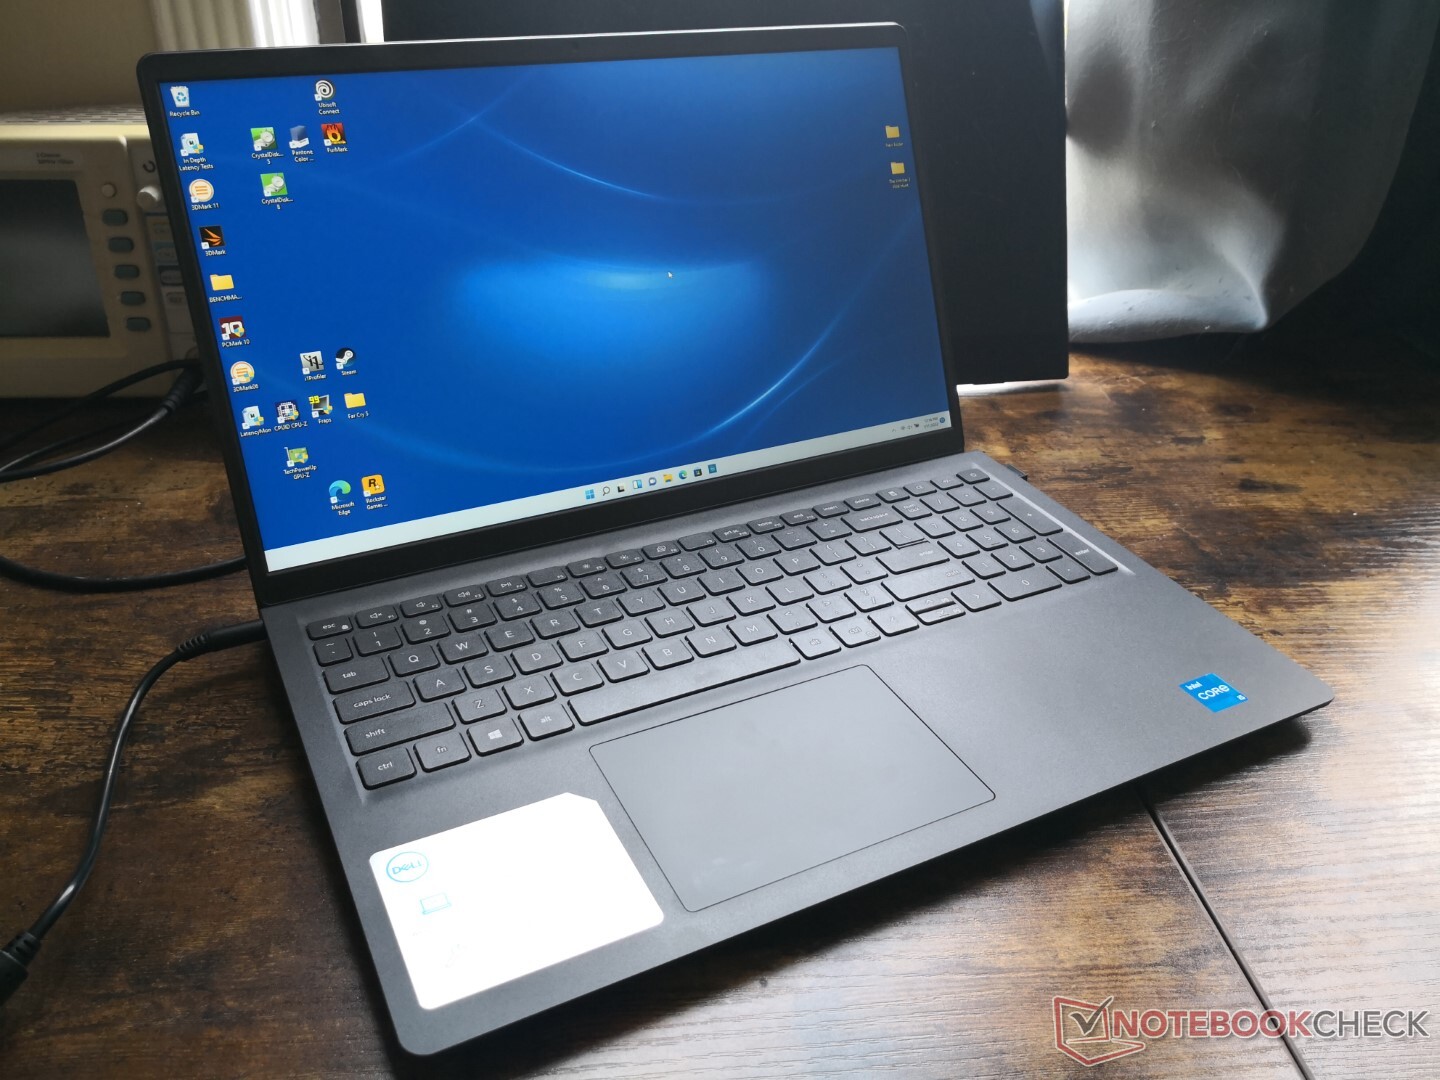 We love how quick and easy it is to add RAM and storage to the Dell Inspiron 15 3511 thumbnail